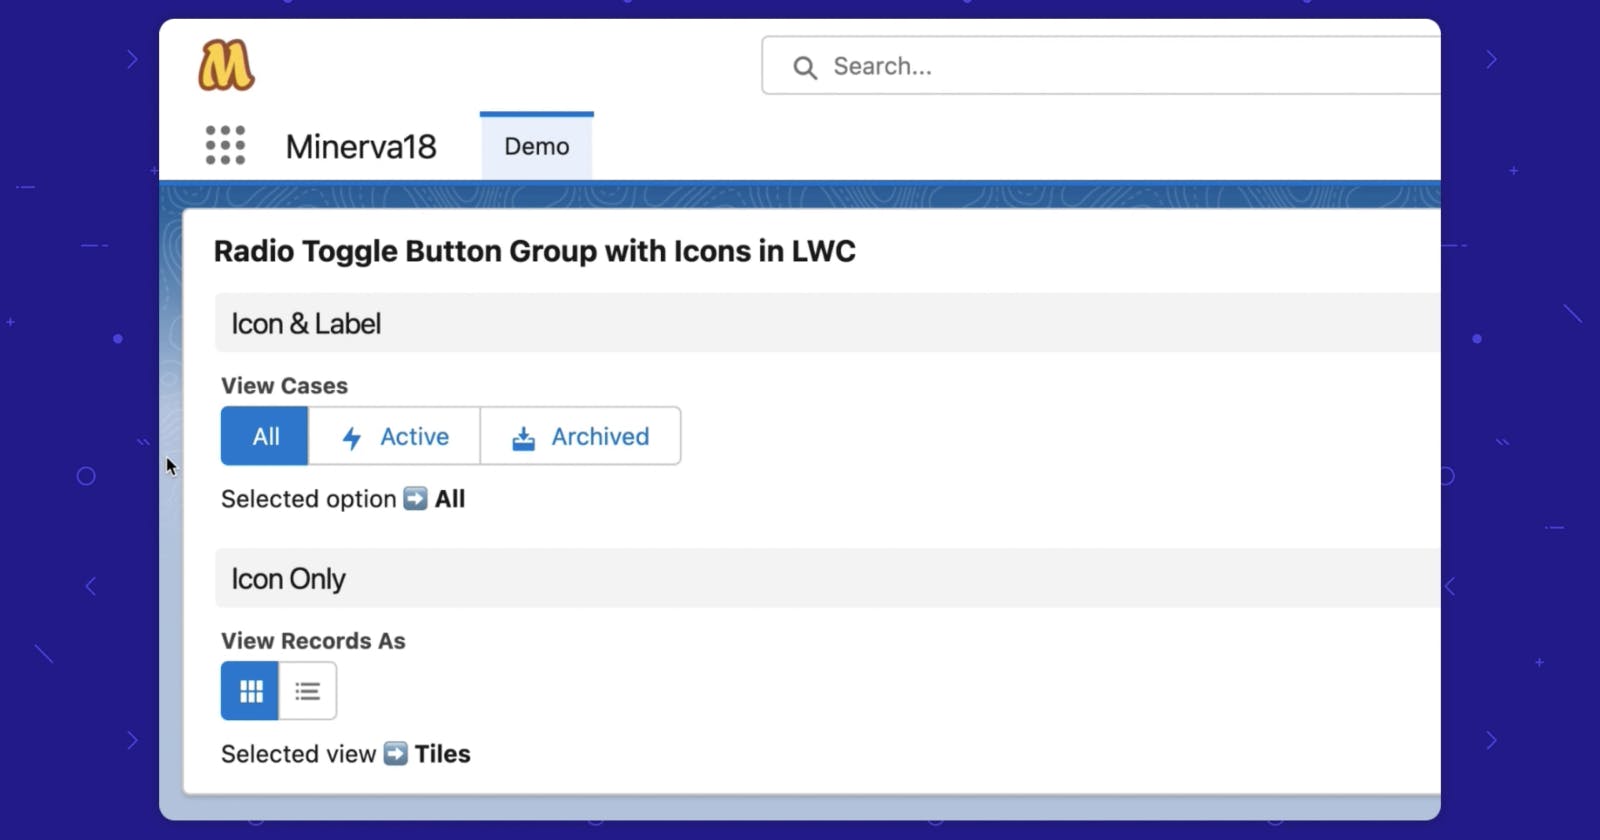 Radio Toggle Button Group with Icons in LWC